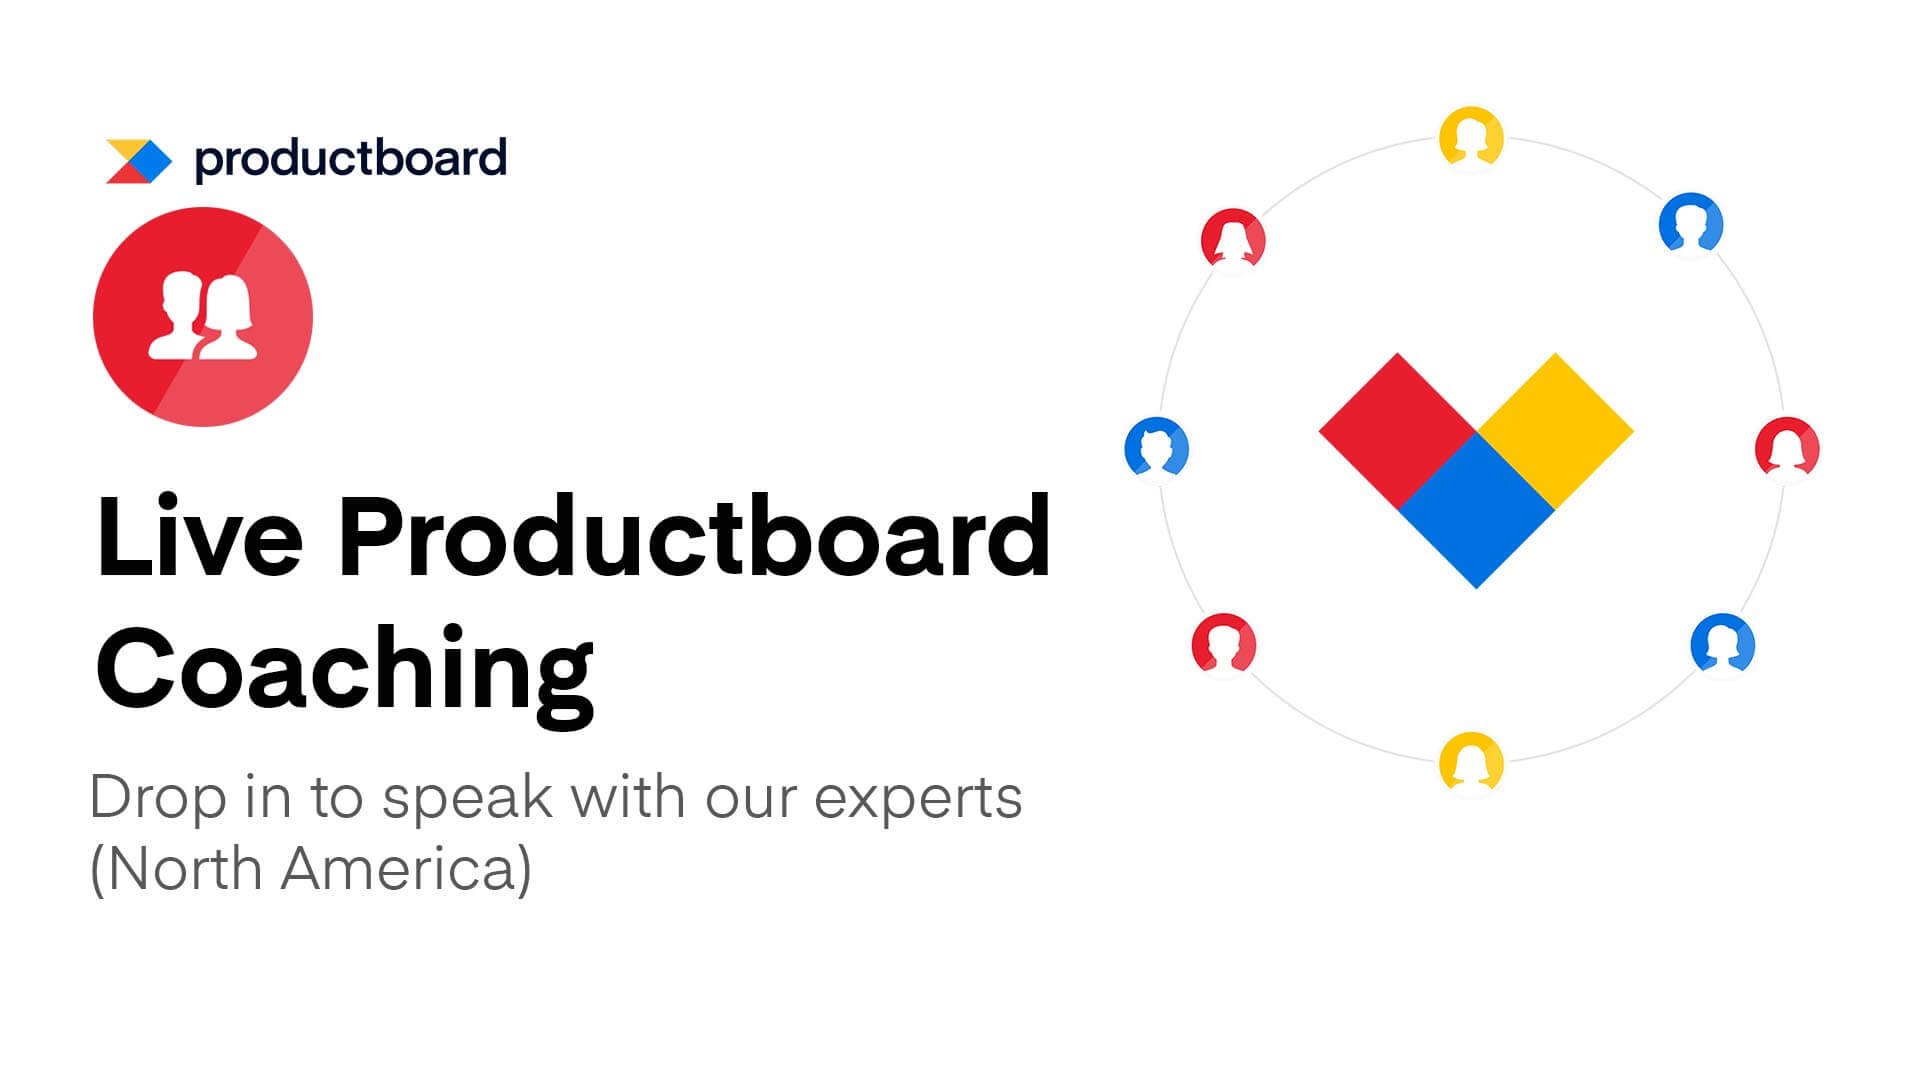 3/3 Live Productboard Coaching (North America)